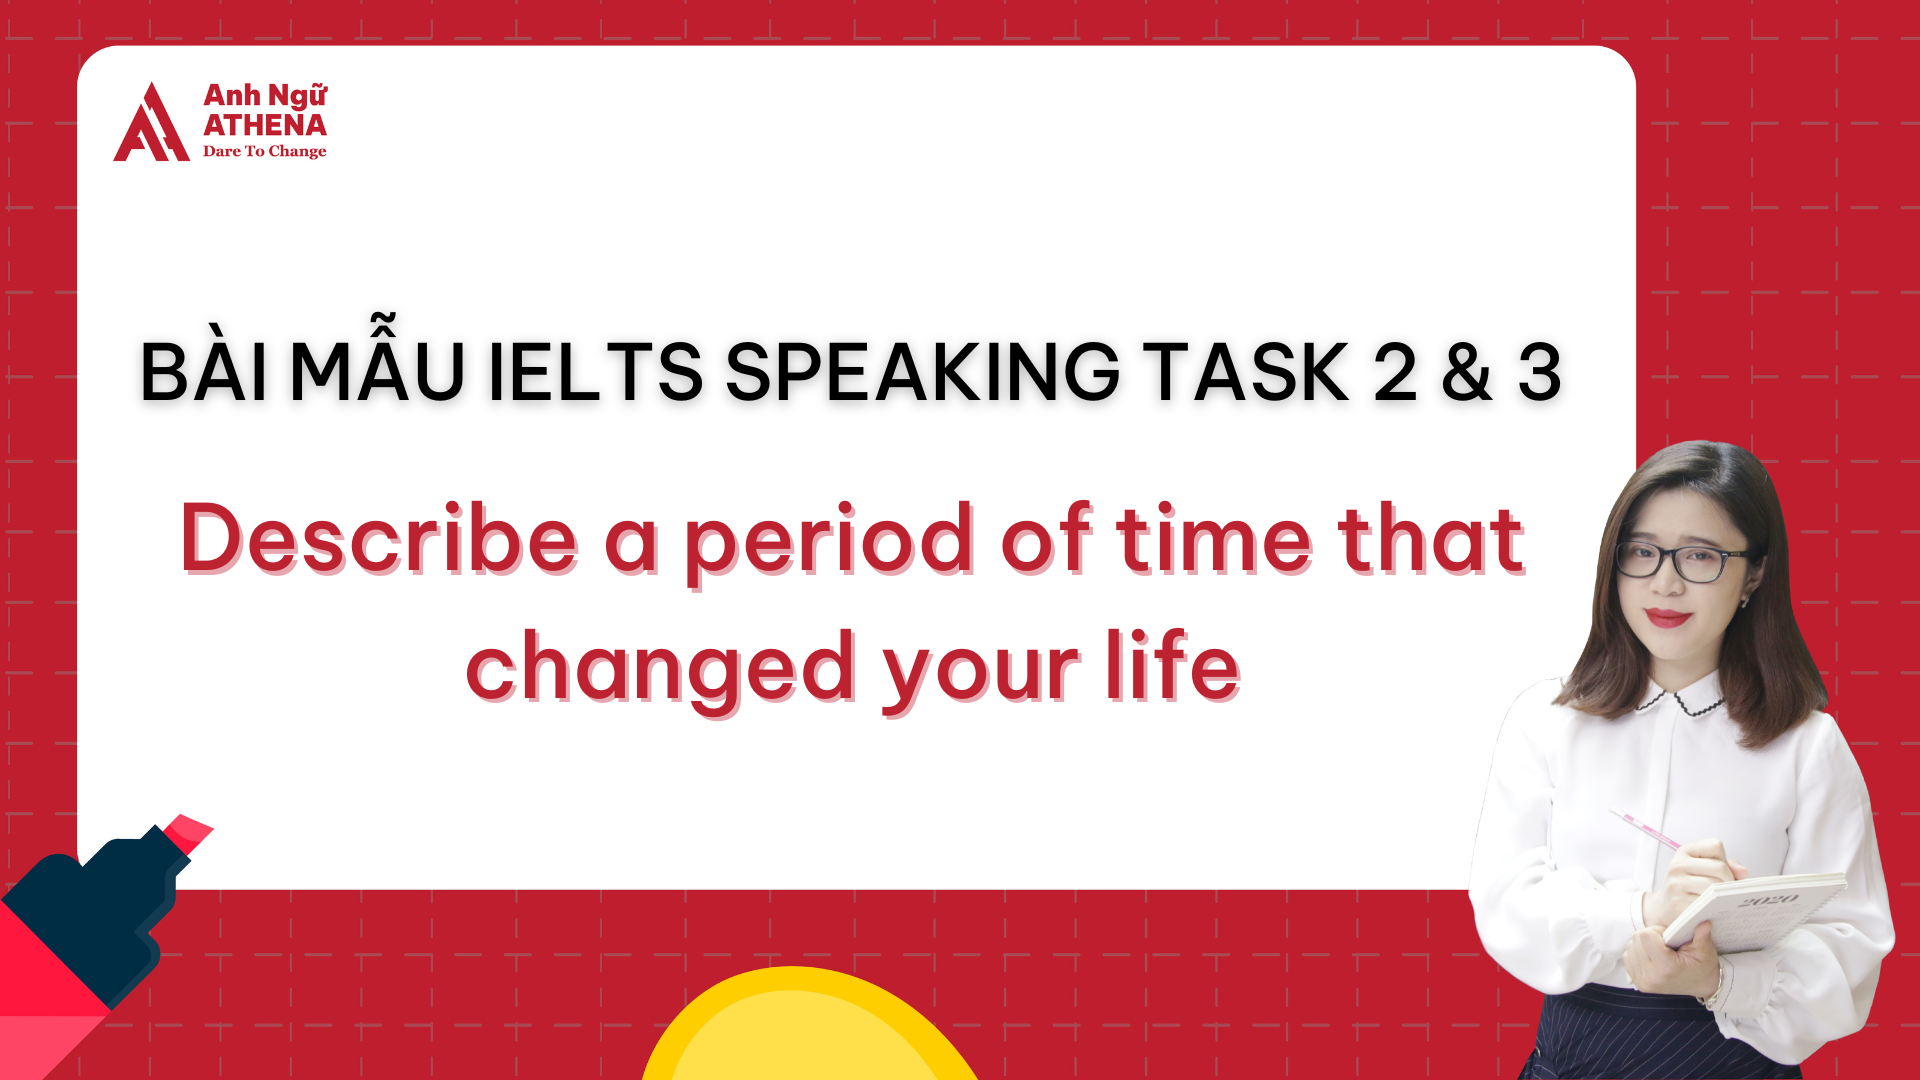 Bài mẫu IELTS Speaking Part 2 & 3 - Topic: Describe a period of time that changed your life